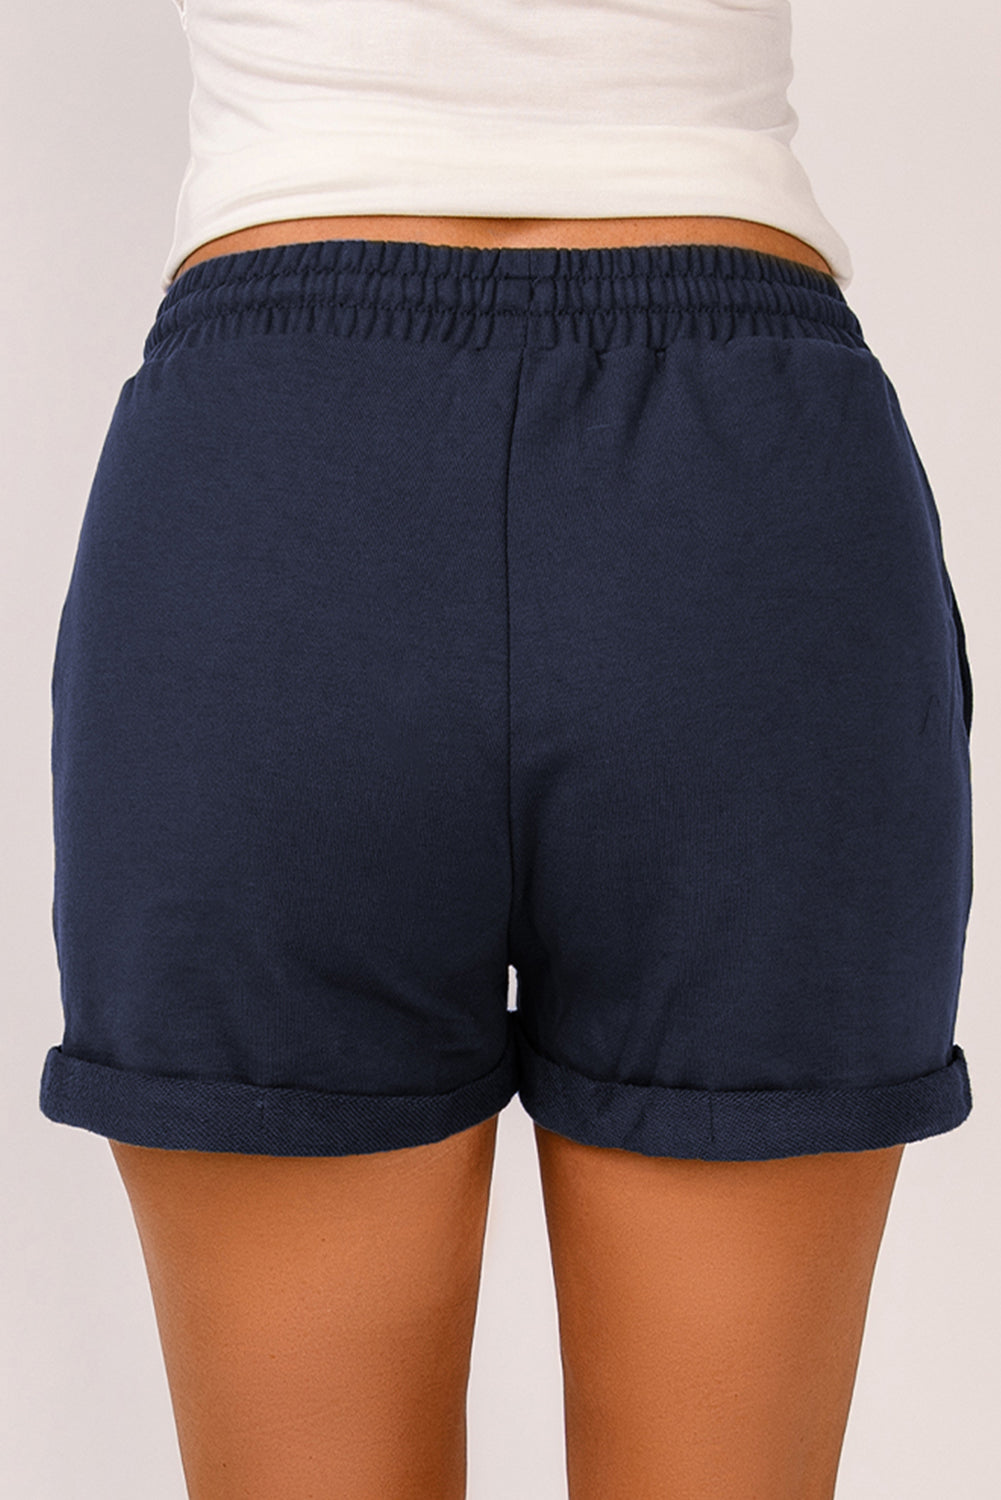 Shop the latest Drawstring Waist Cuffed Shorts for chic comfort. Perfect for casual outings or lazy days at home. Grab yours now!